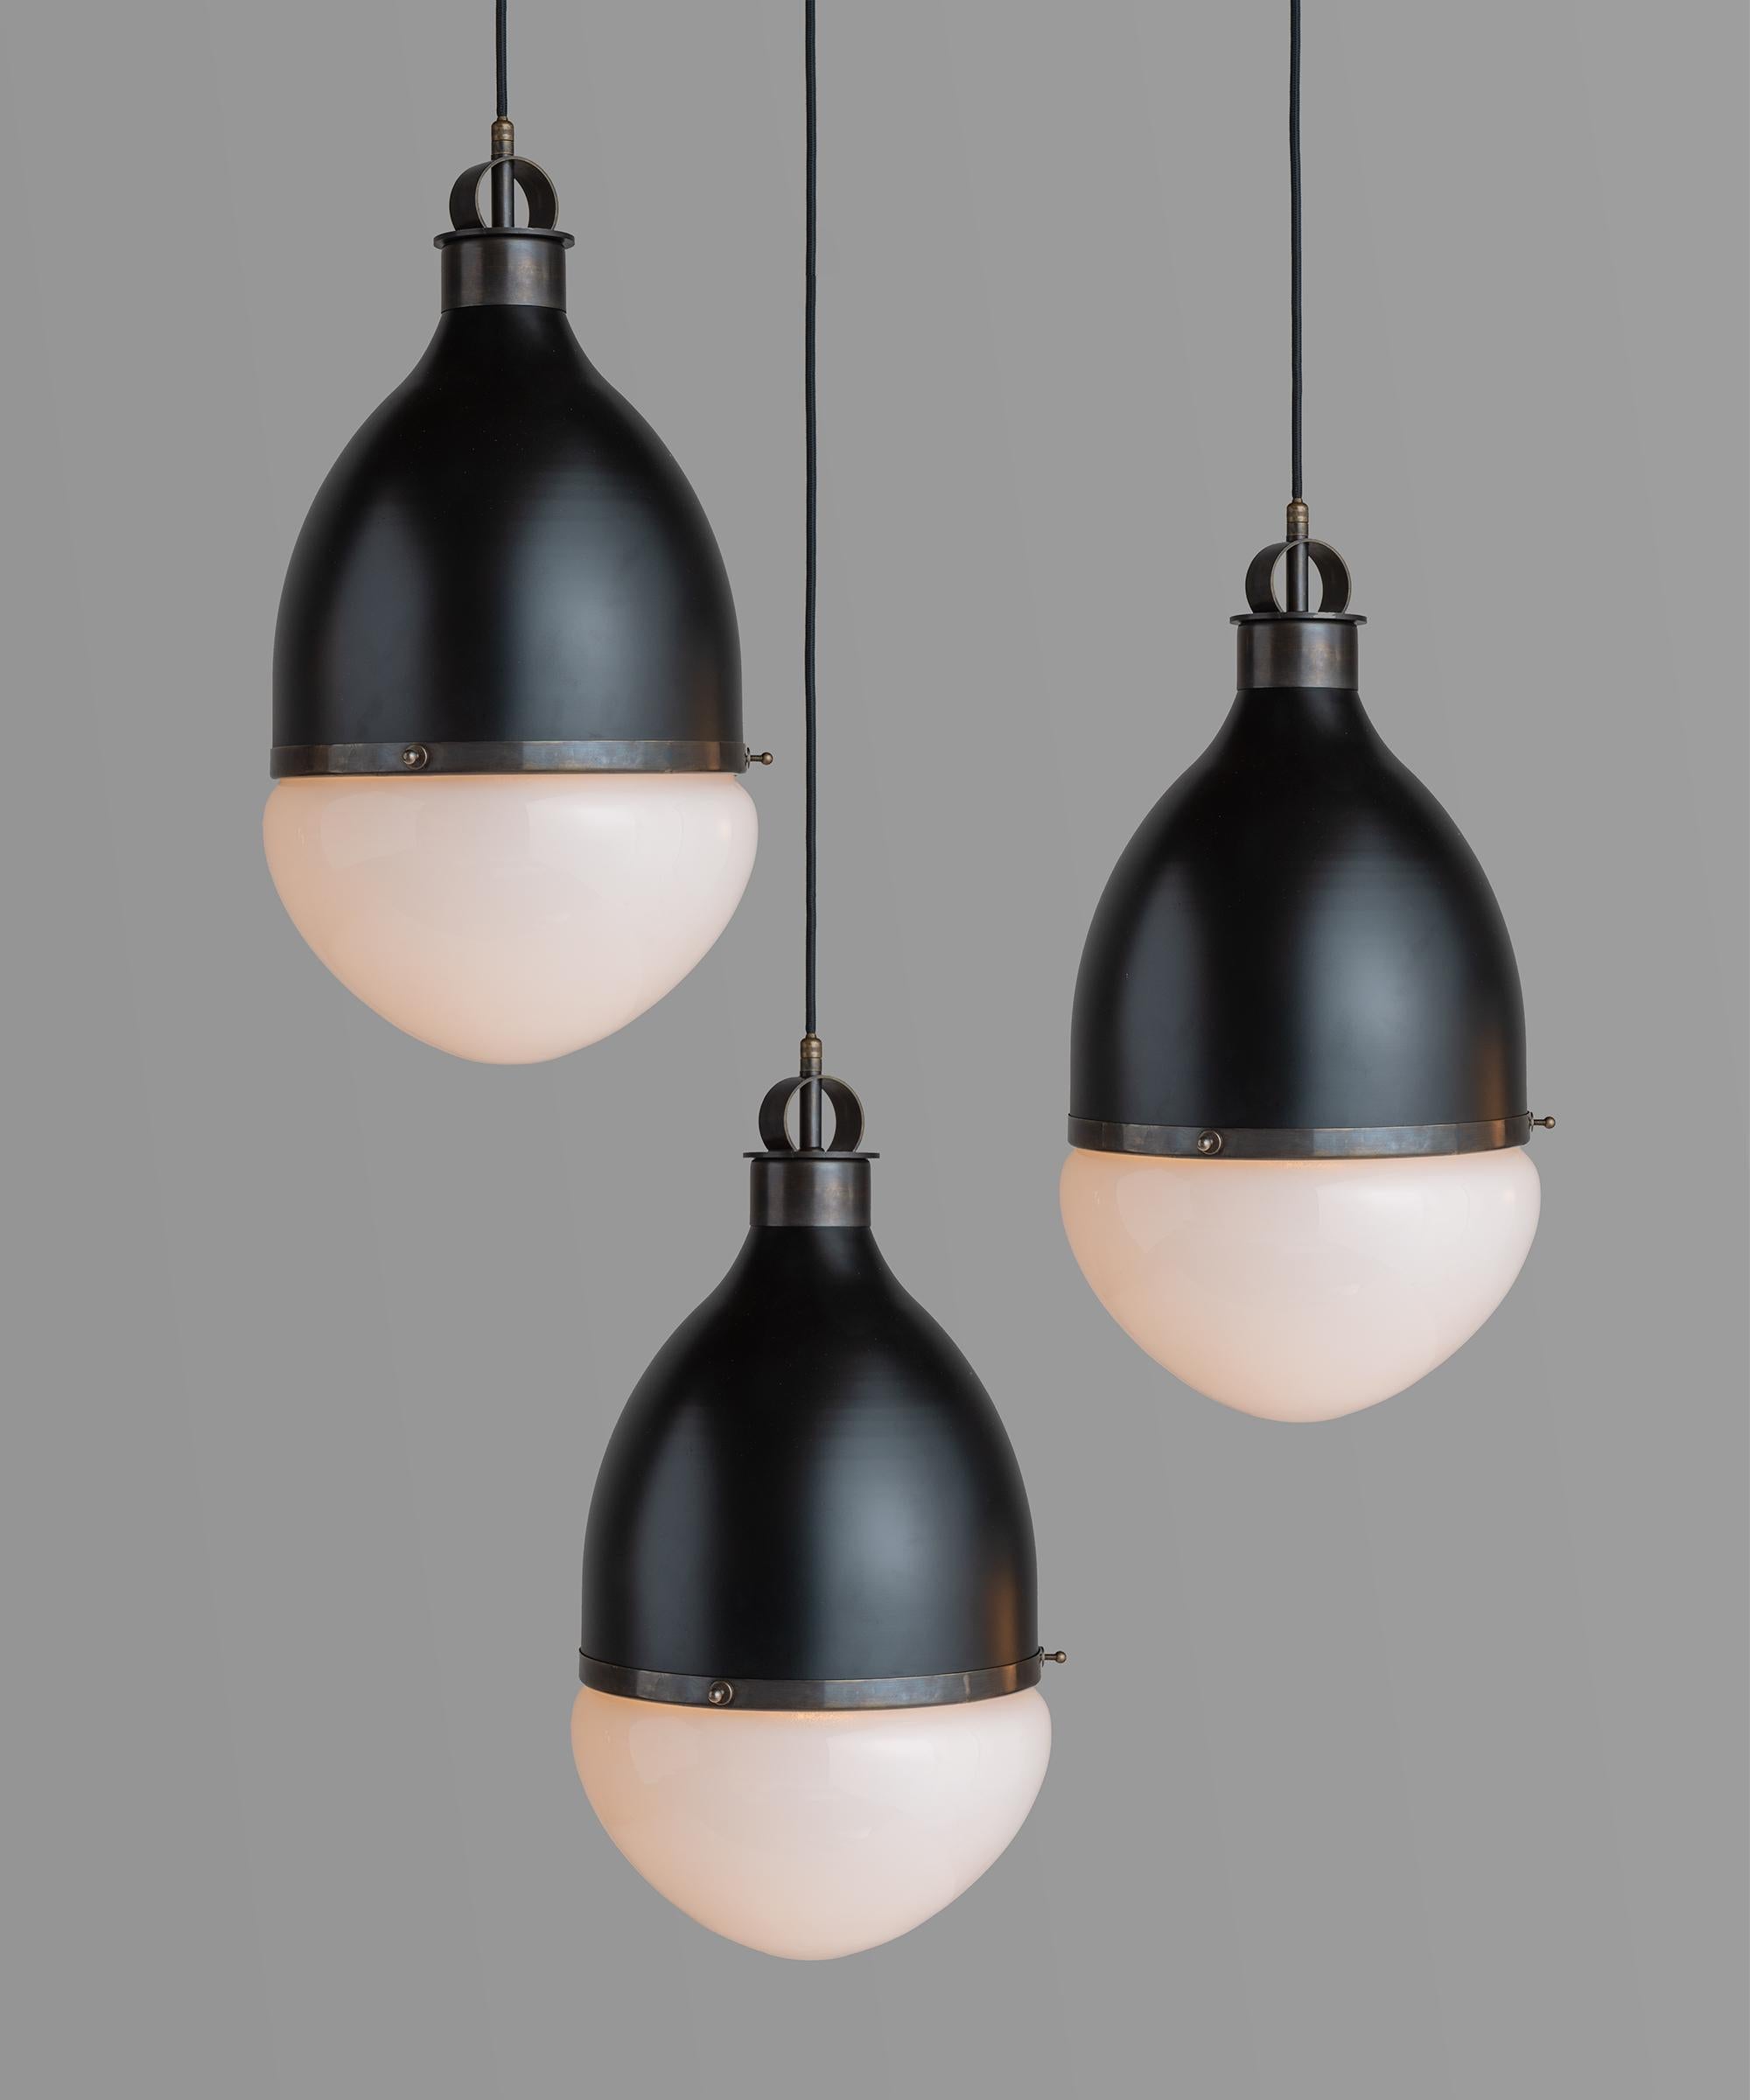 Brass & Black Metal Pendant
Made in Italy
Large scale hanging pendant with brass details and frosted glass shade.
10